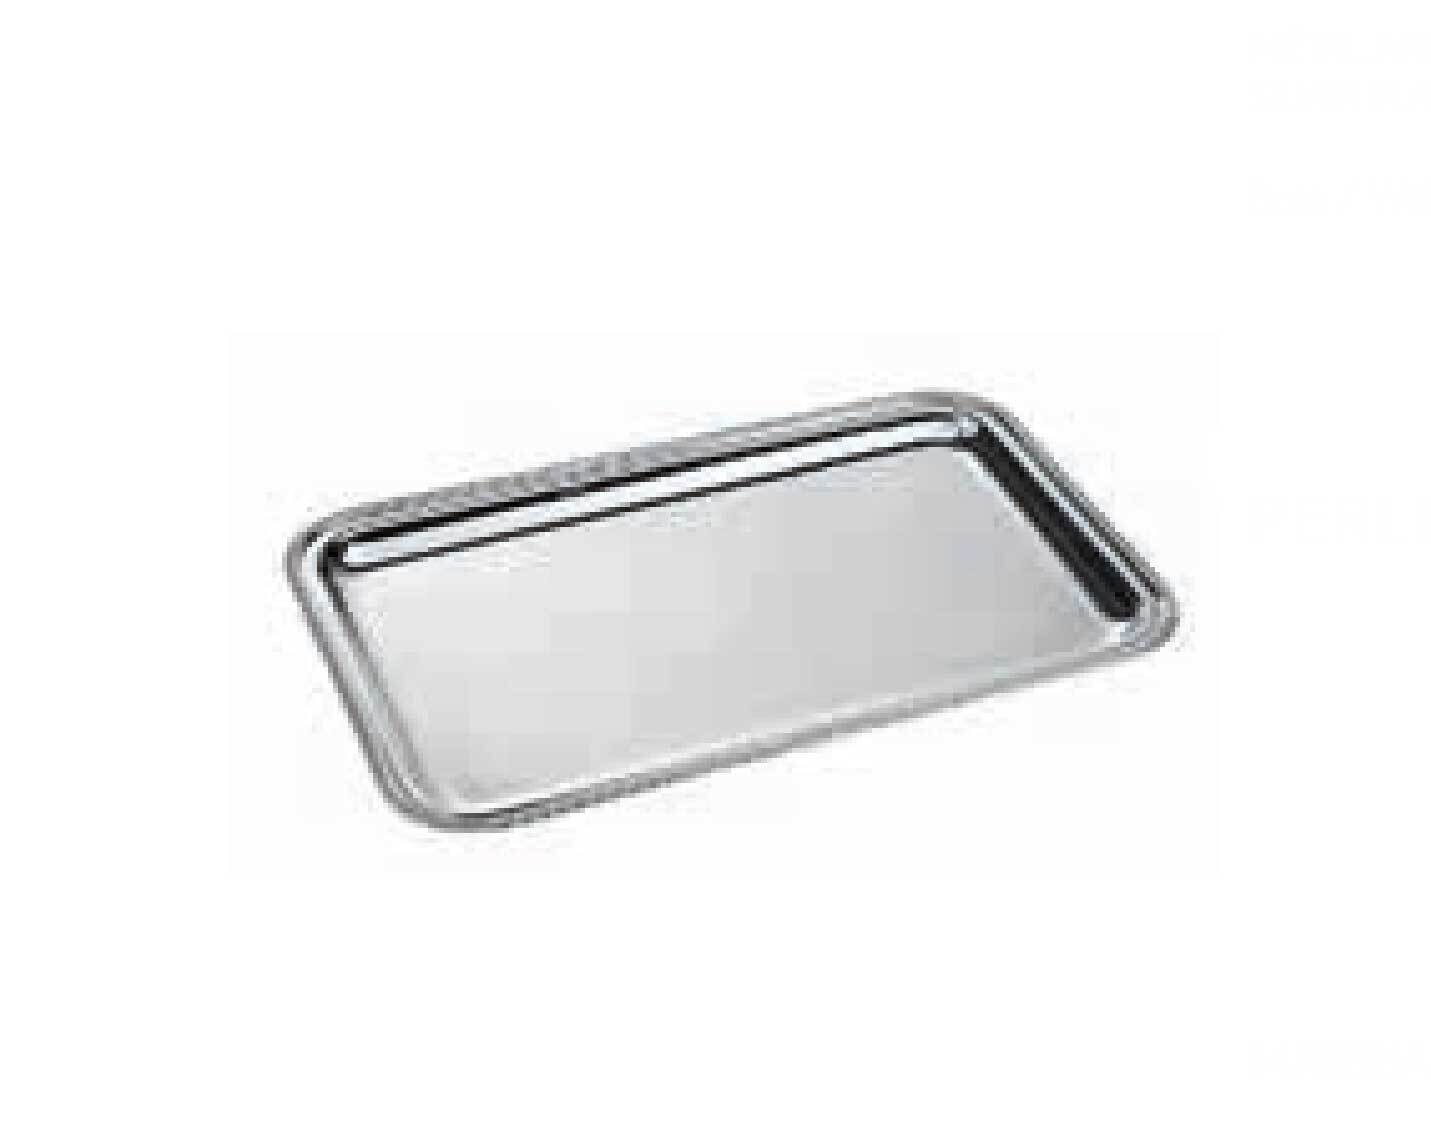 Ercuis Perles Rectangular Serving Tray 25.625 x 19.625 Inch Silver Plated F51P451-65